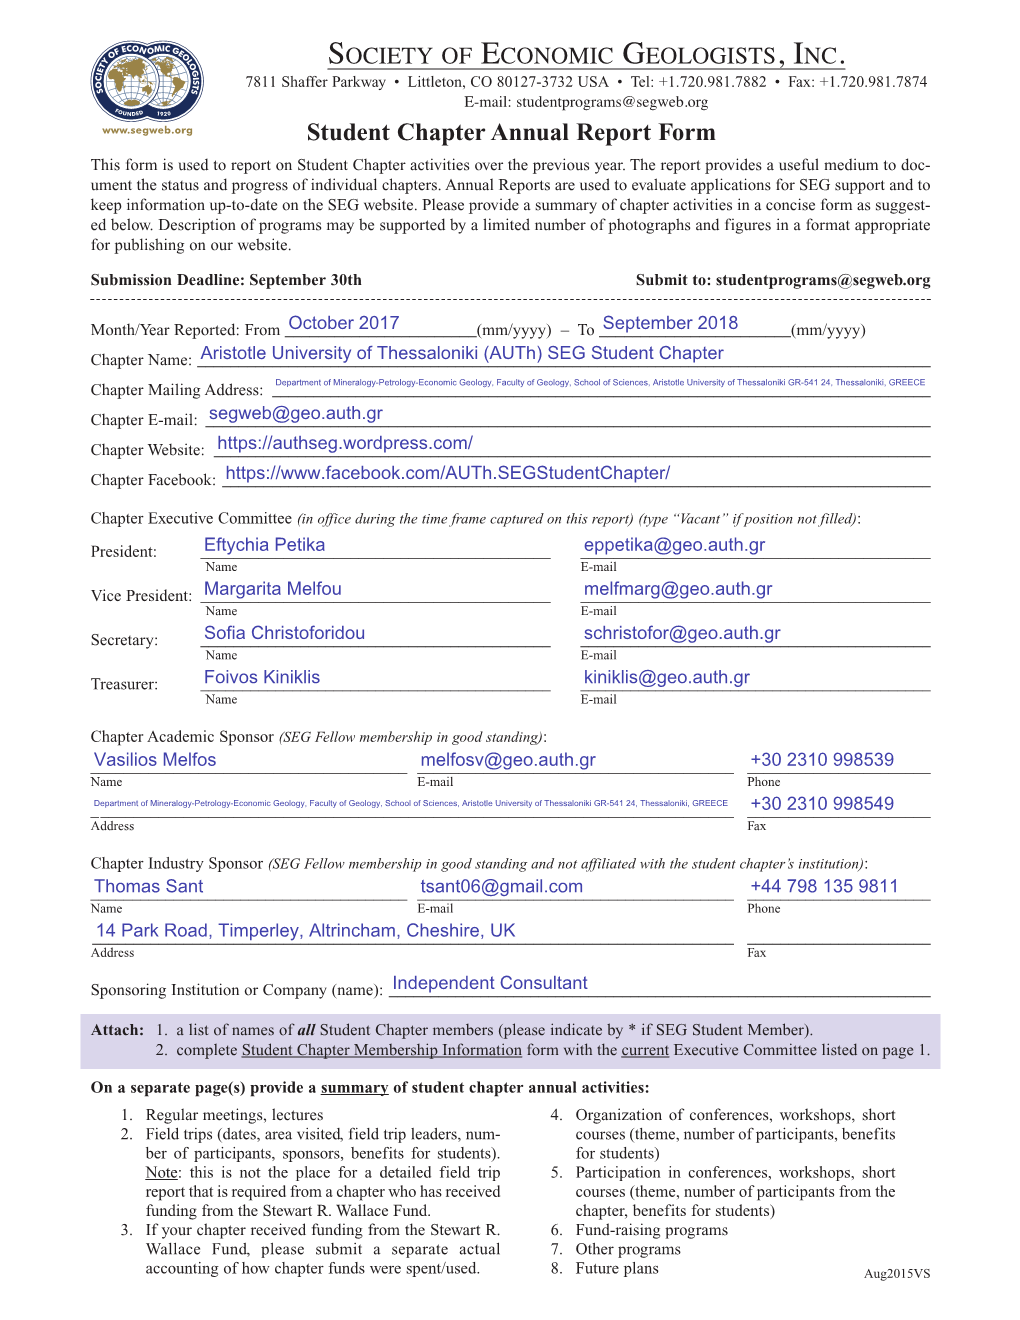 Student Chapter Annual Report Form This Form Is Used to Report on Student Chapter Activities Over the Previous Year